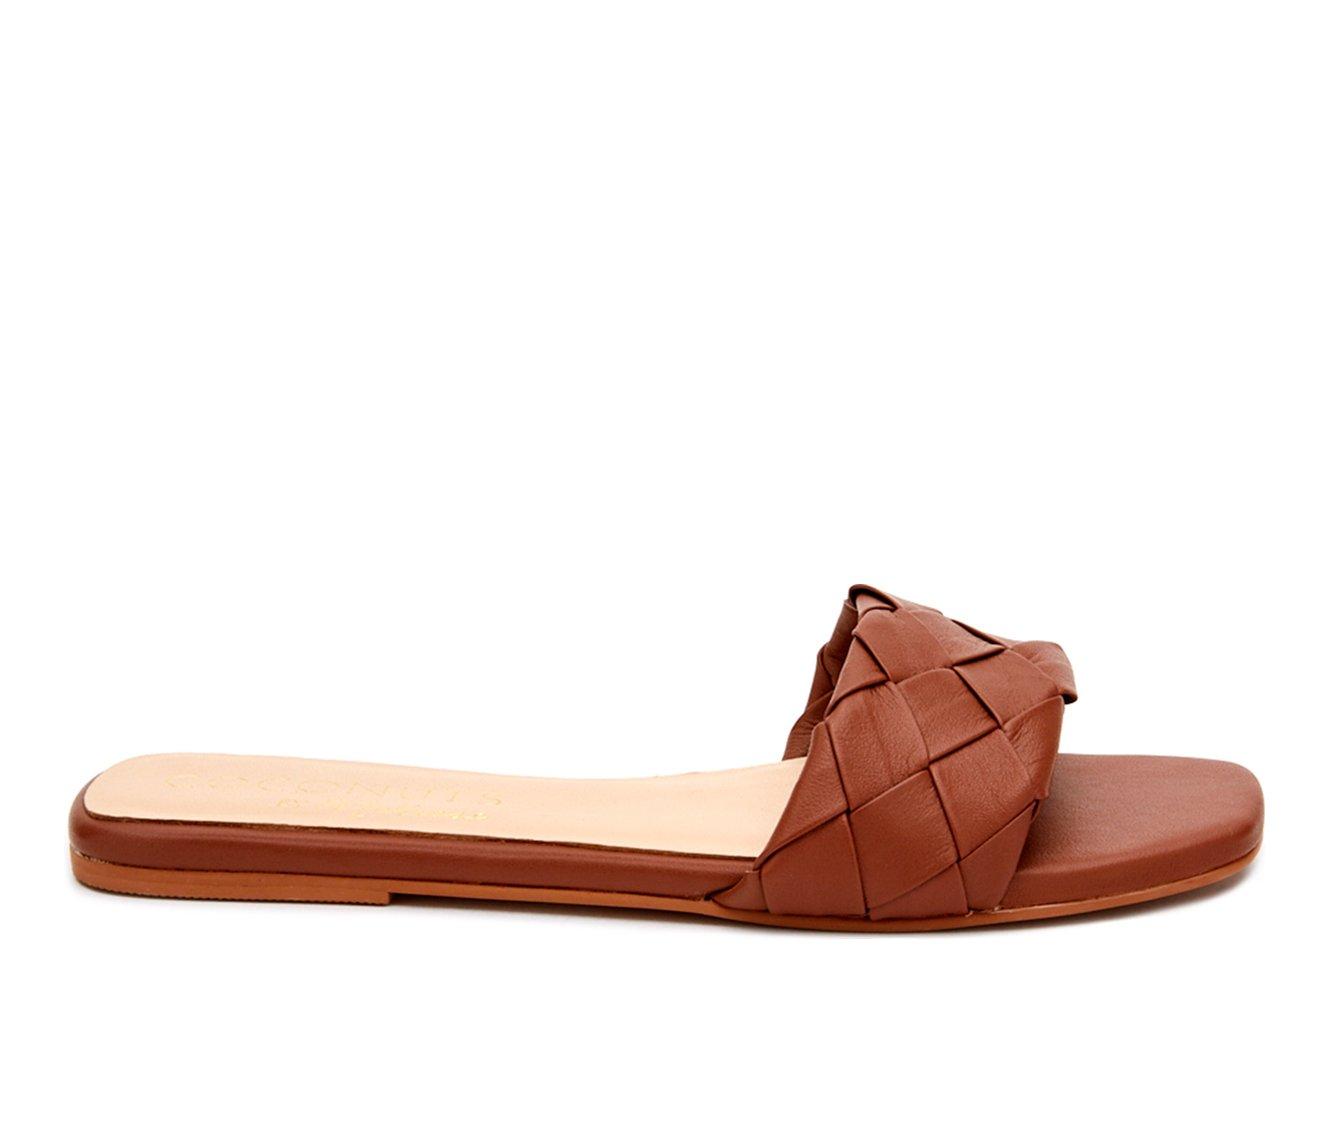 Women's Coconuts by Matisse Sweet Pea Sandals